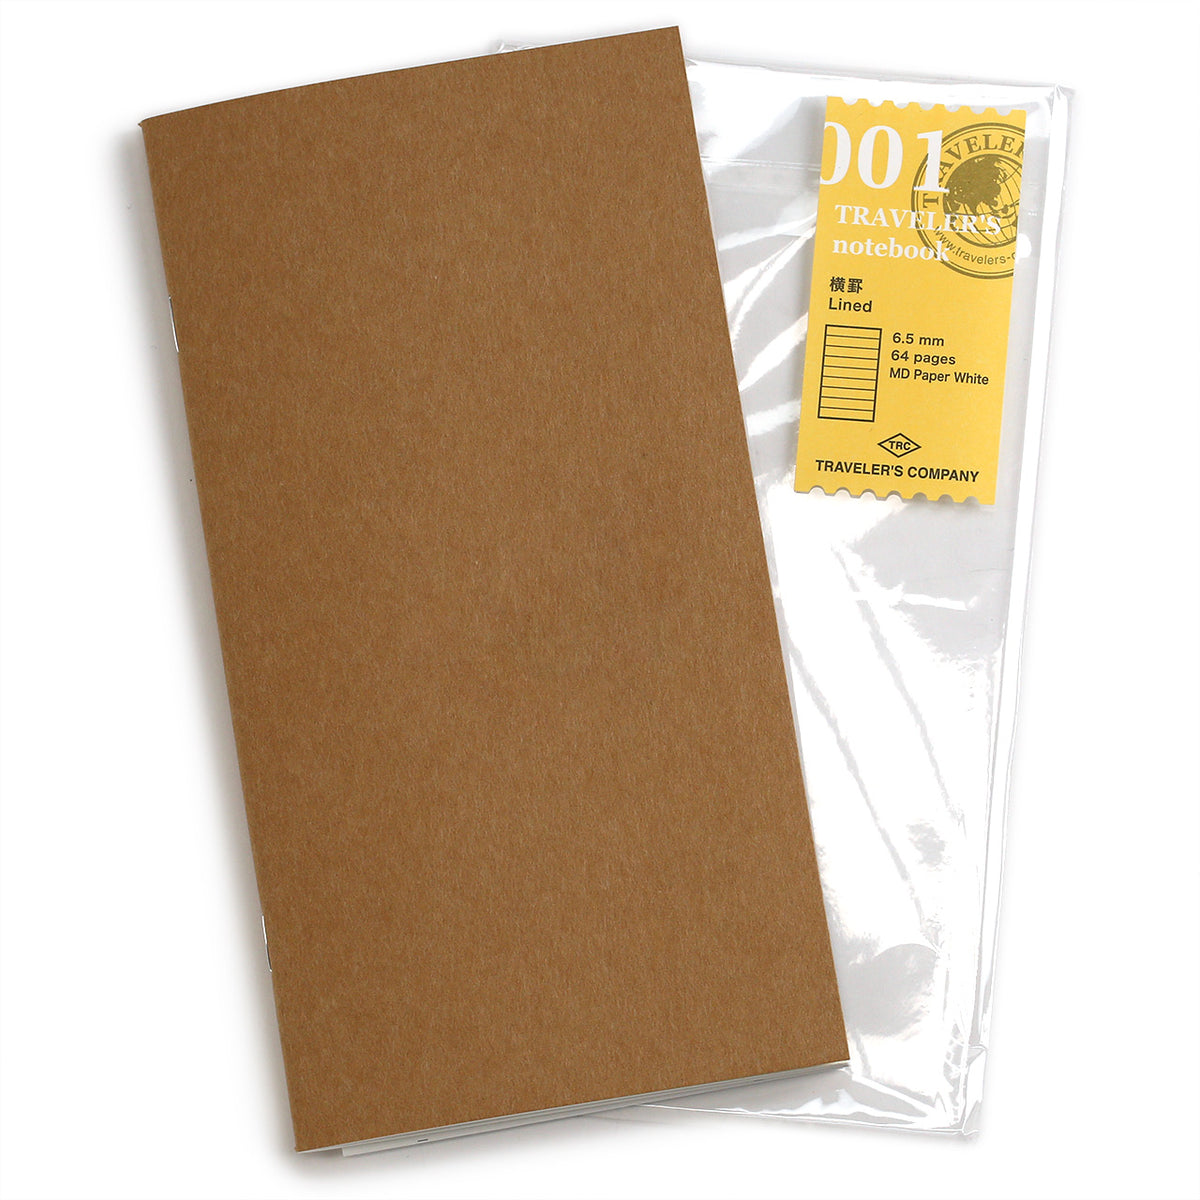 Traveler&#39;s notebook 001 lined MD paper refill, showing the kraft cover and the yellow label